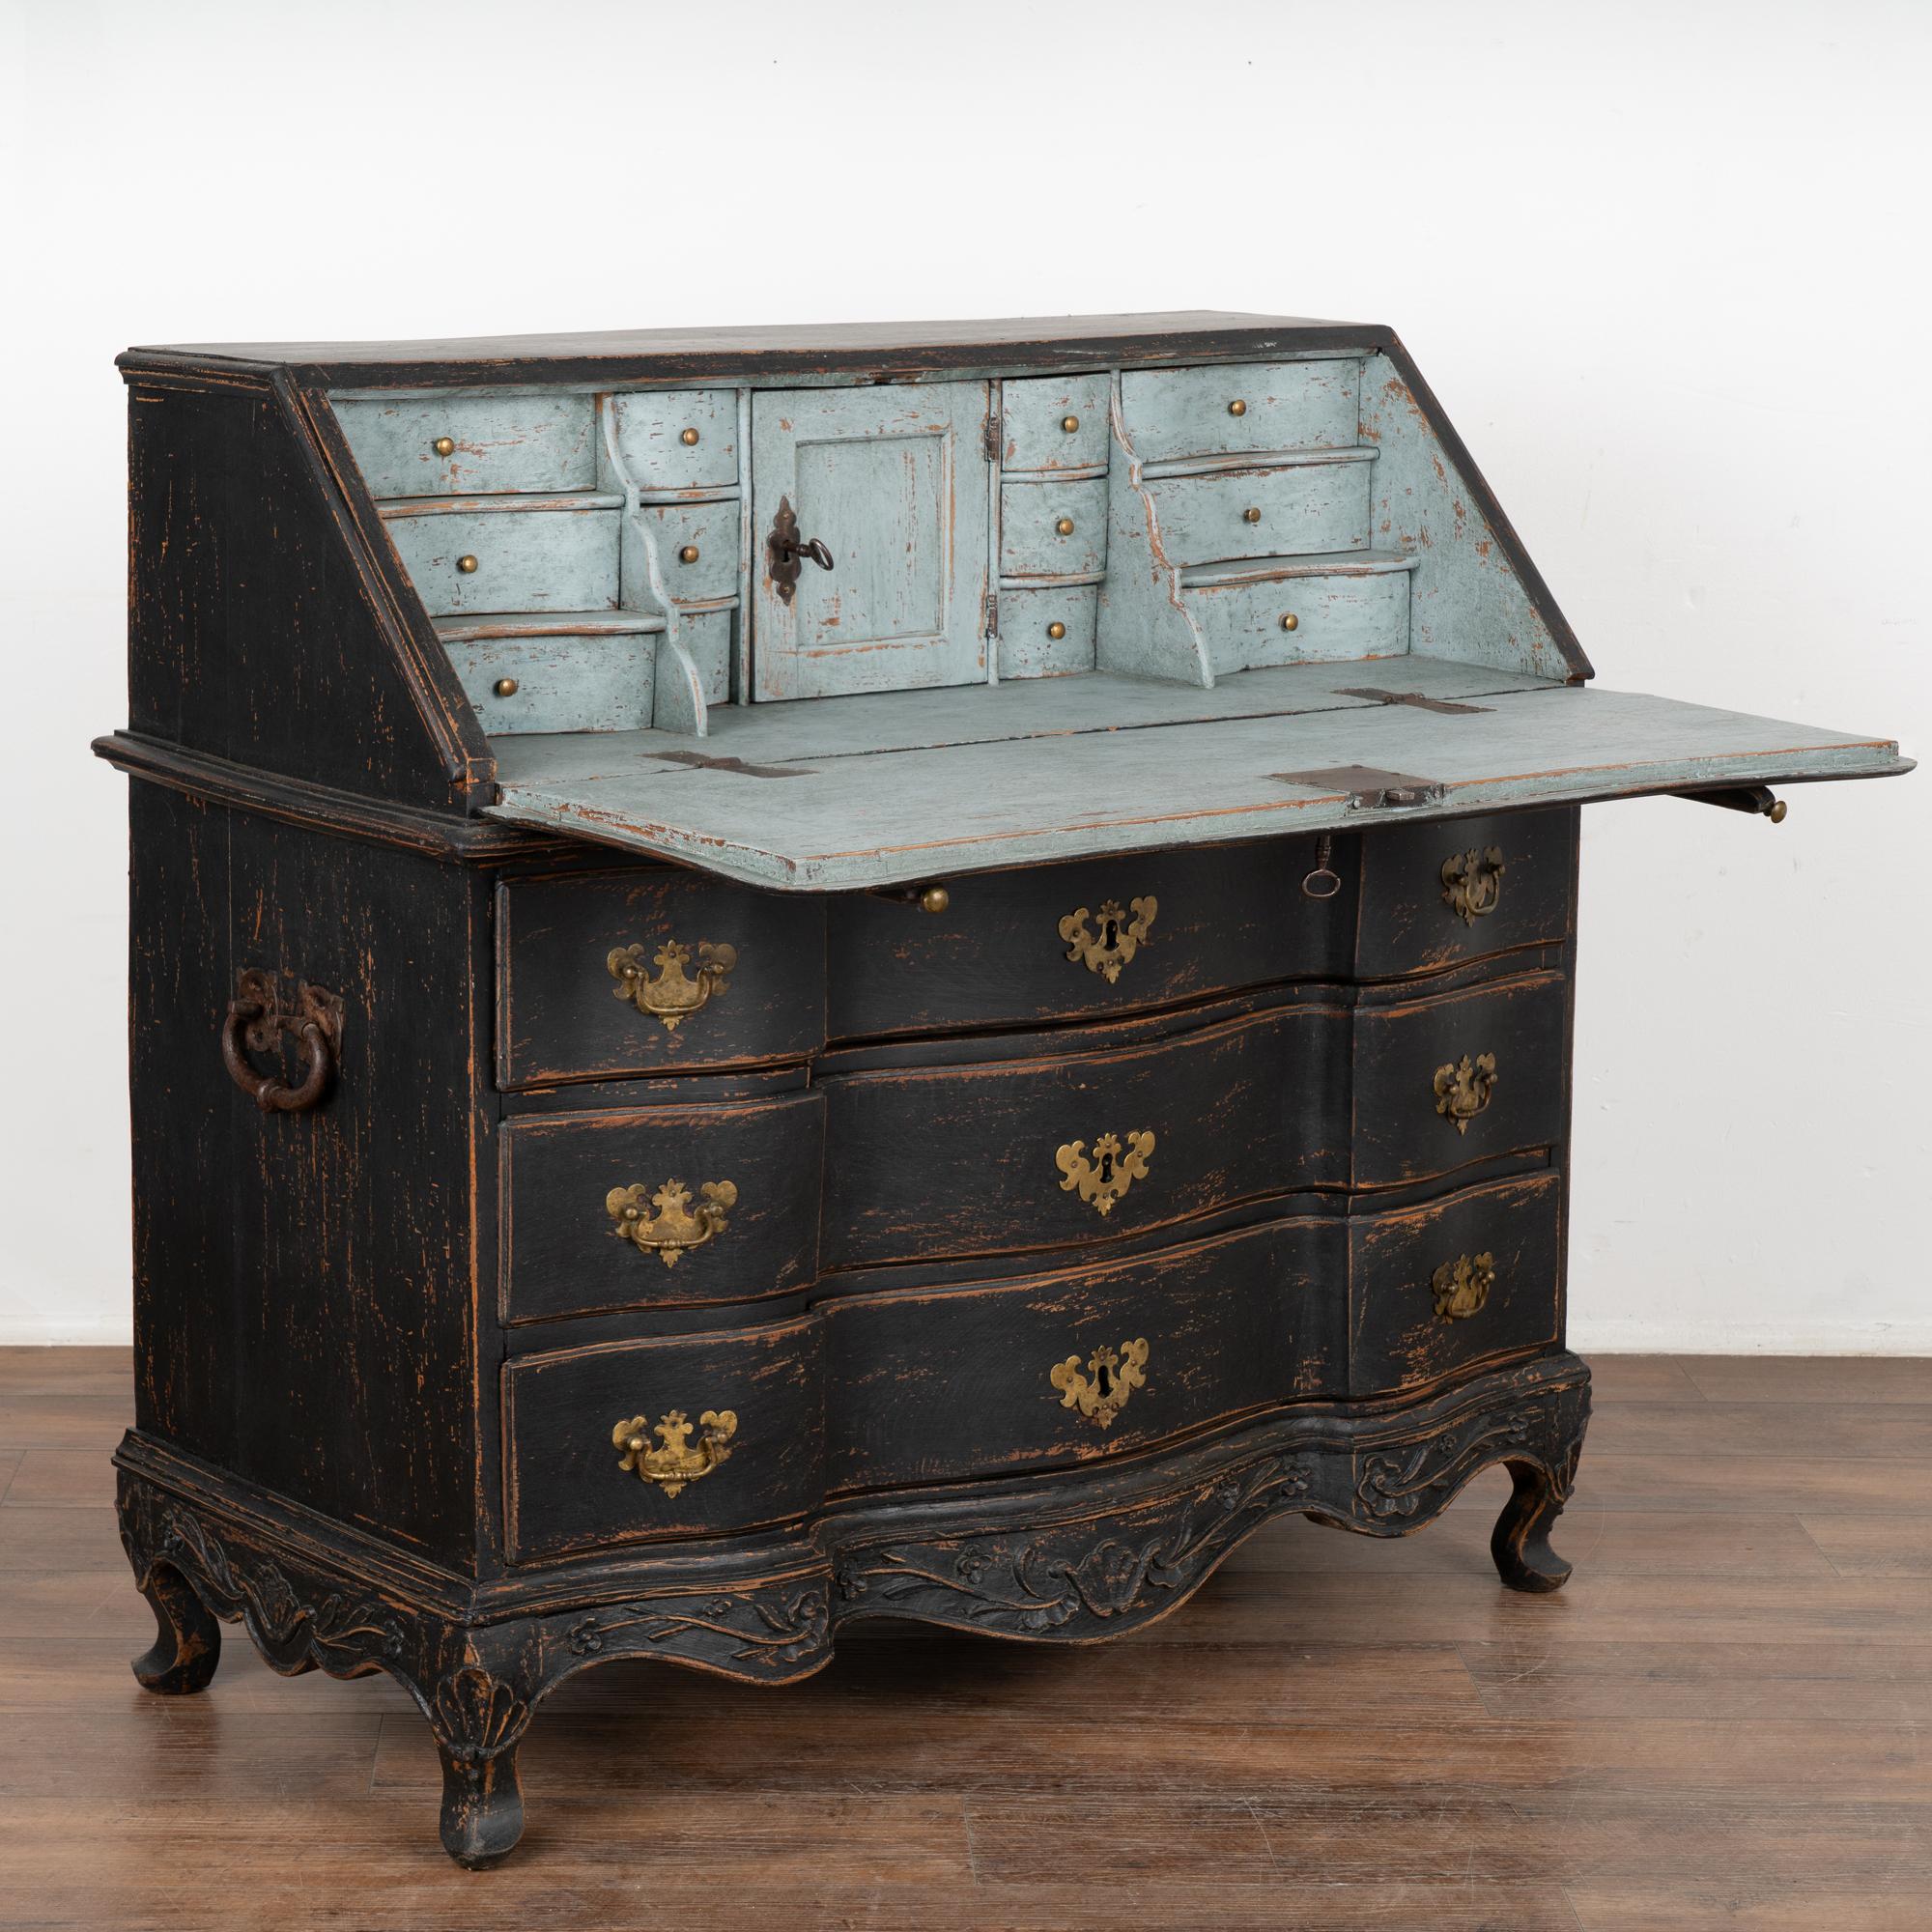 This pine rococo secretary reflects the grace and class of Swedish styling in the early 1800's.
The dramatic serpentine drawers with curvaceous front and carved skirt resting on cabriolet feet all add a romantic touch.
The traditional interior with